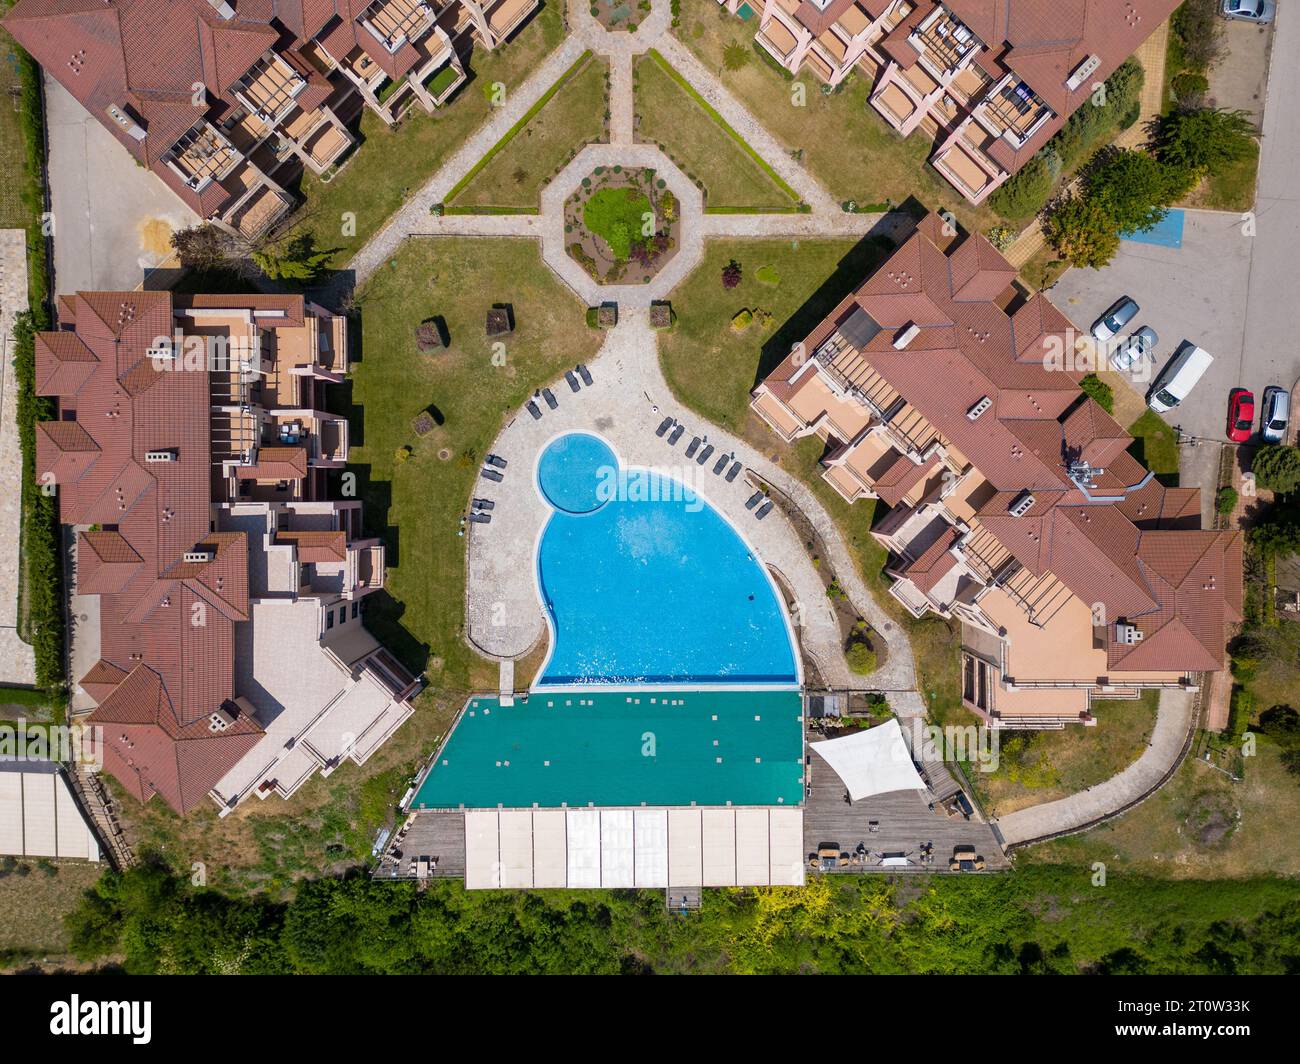 The massive modern hotel complex sprawled beneath, boasting a myriad of swimming pools, sports fields, and recreation areas. From above, the vibrant o Stock Photo